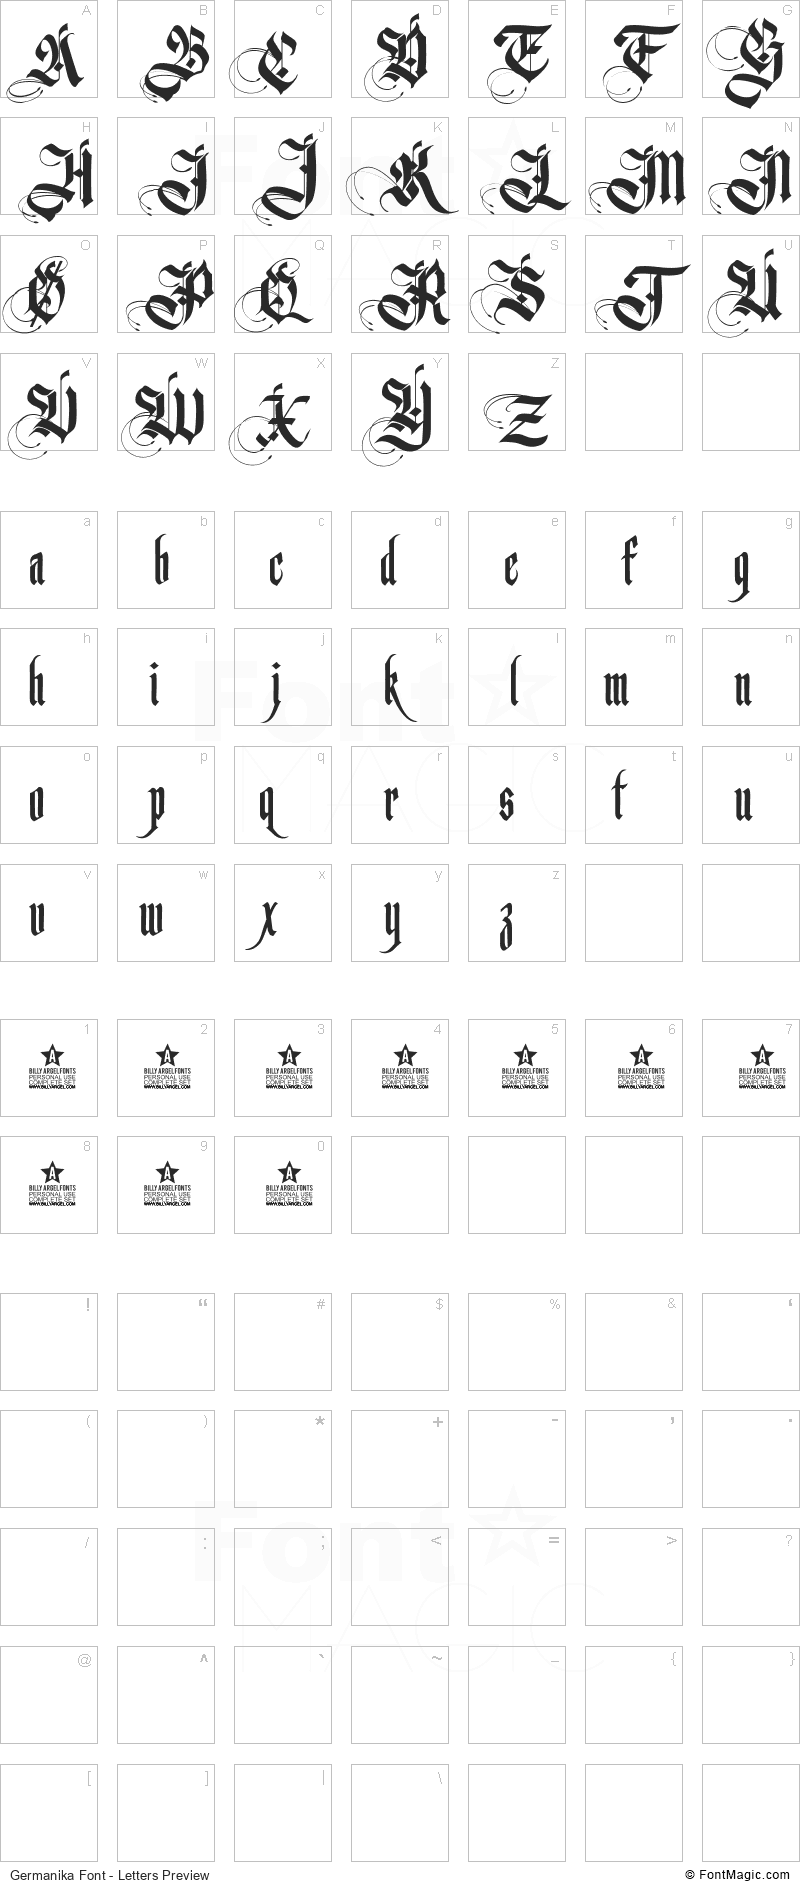 Germanika Font - All Latters Preview Chart